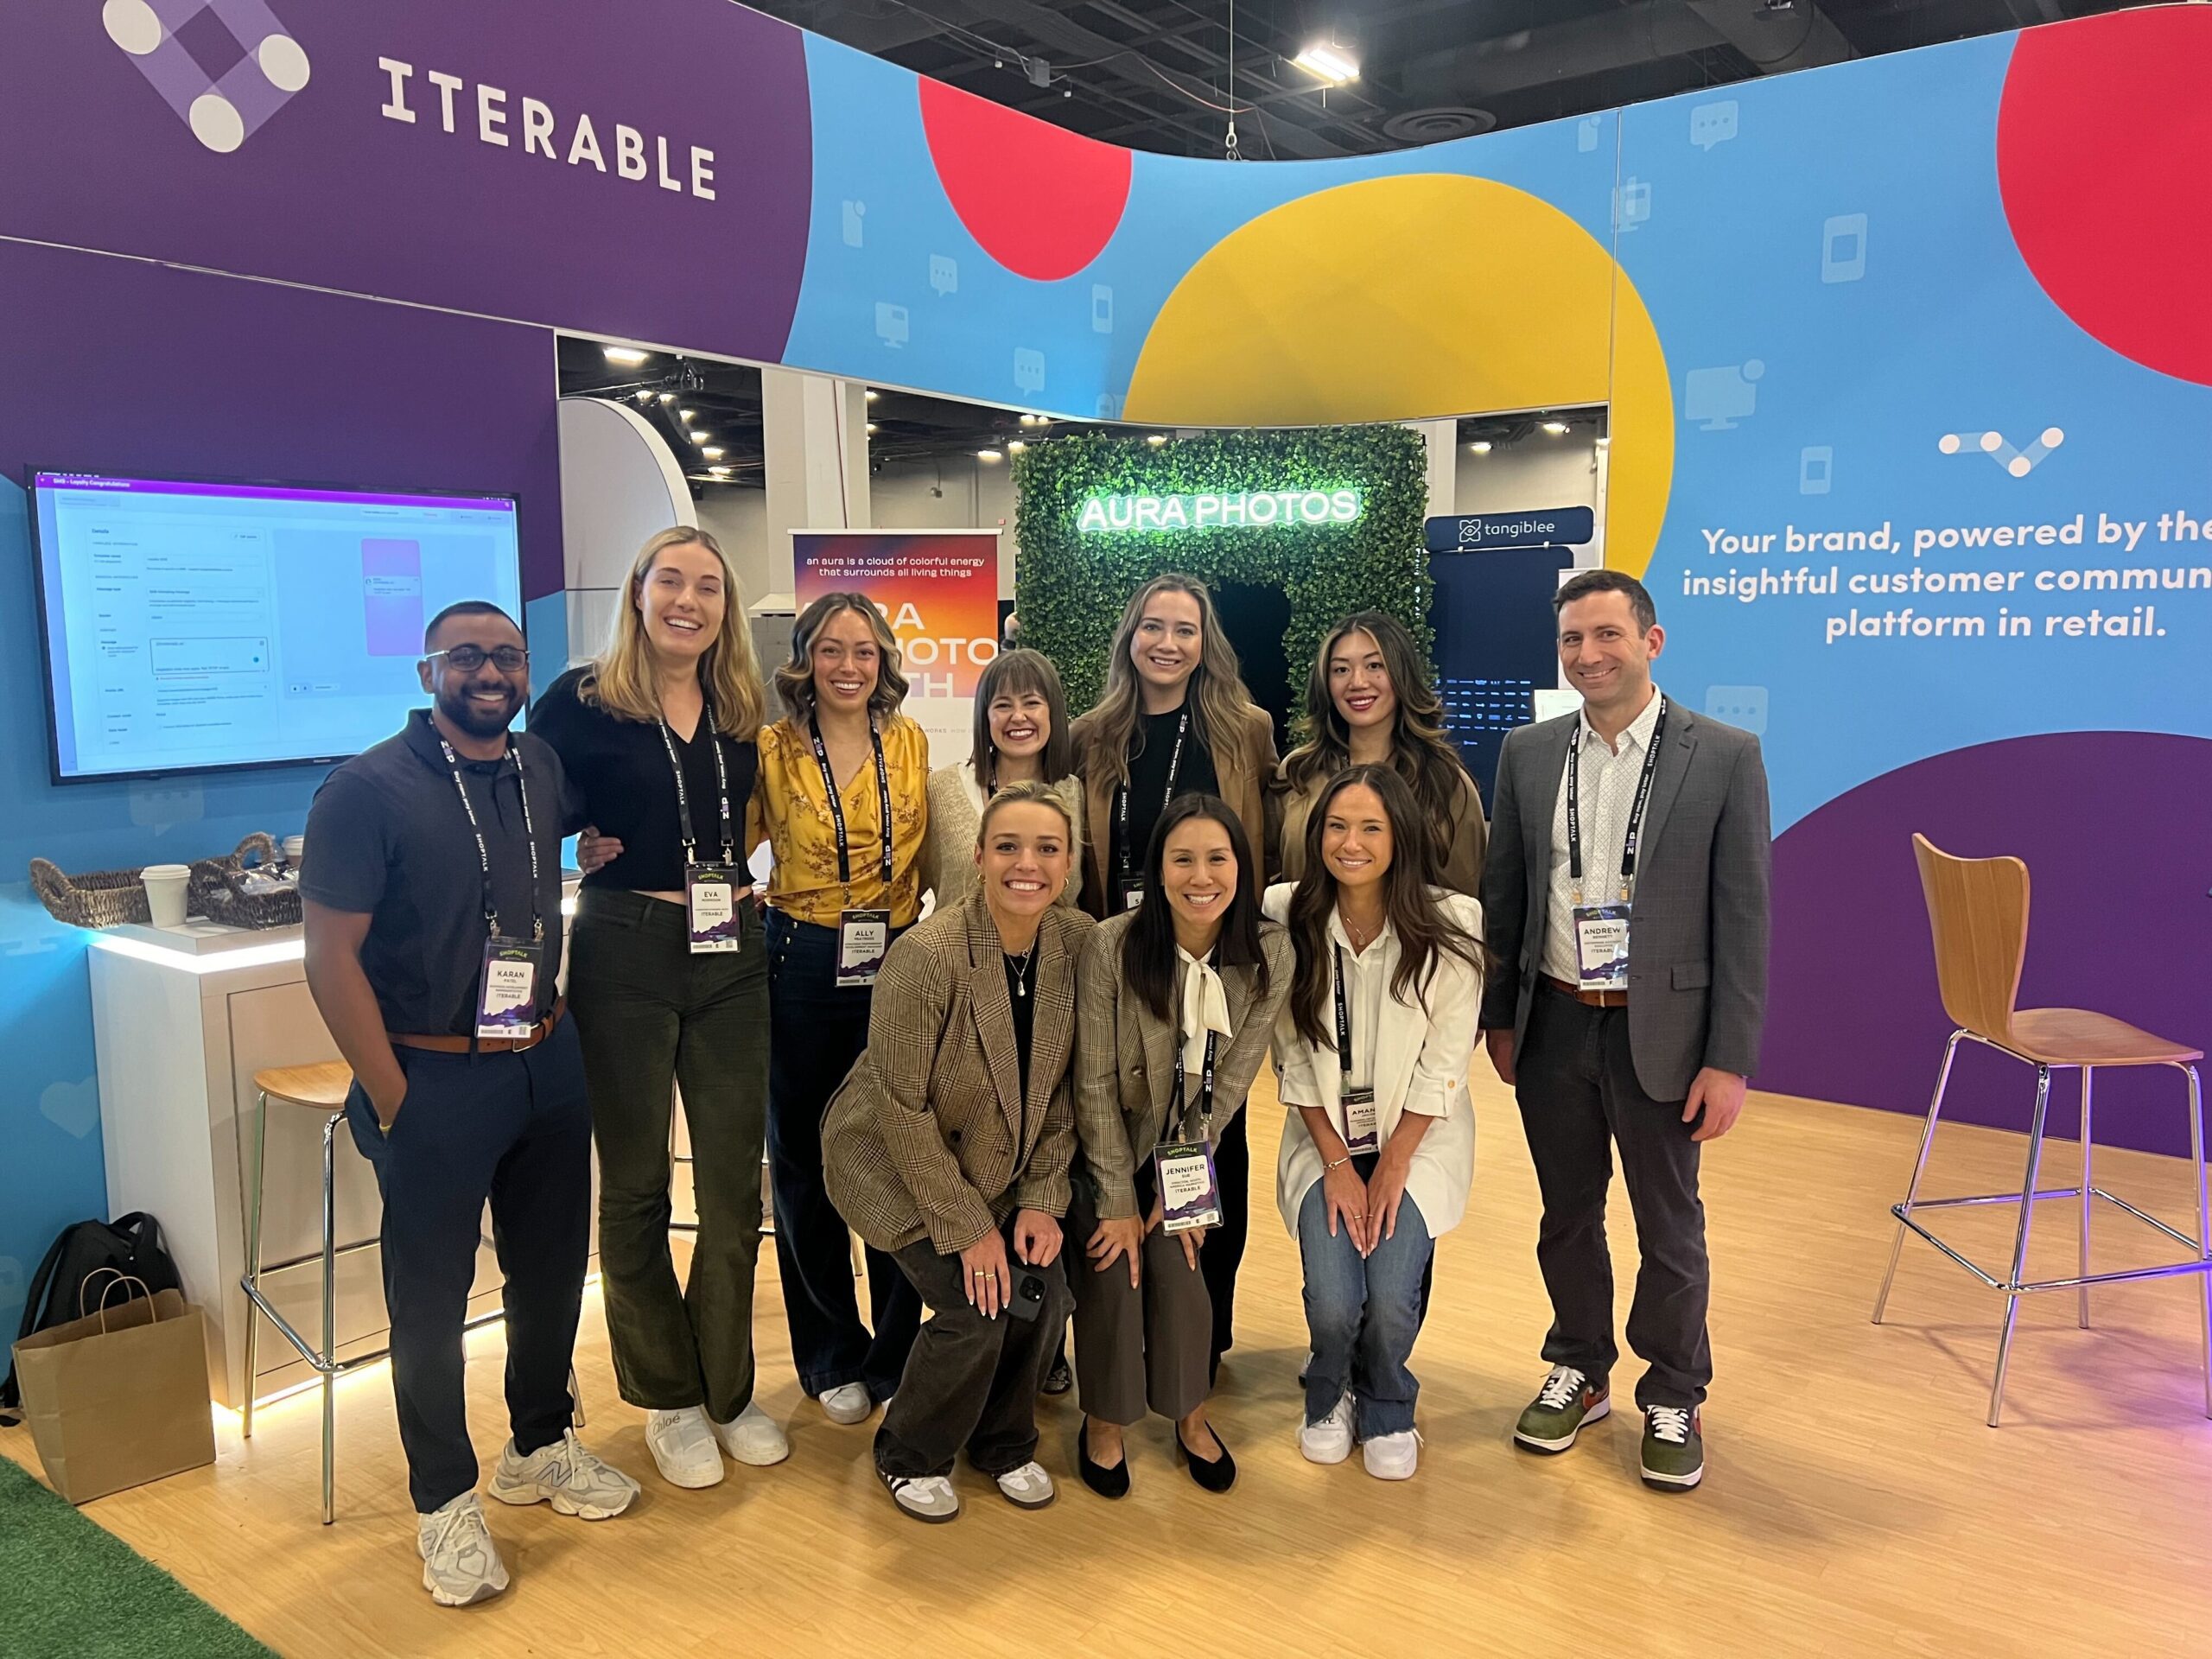 Group photo of the Iterable team at Shoptalk standing at the Iterable booth.